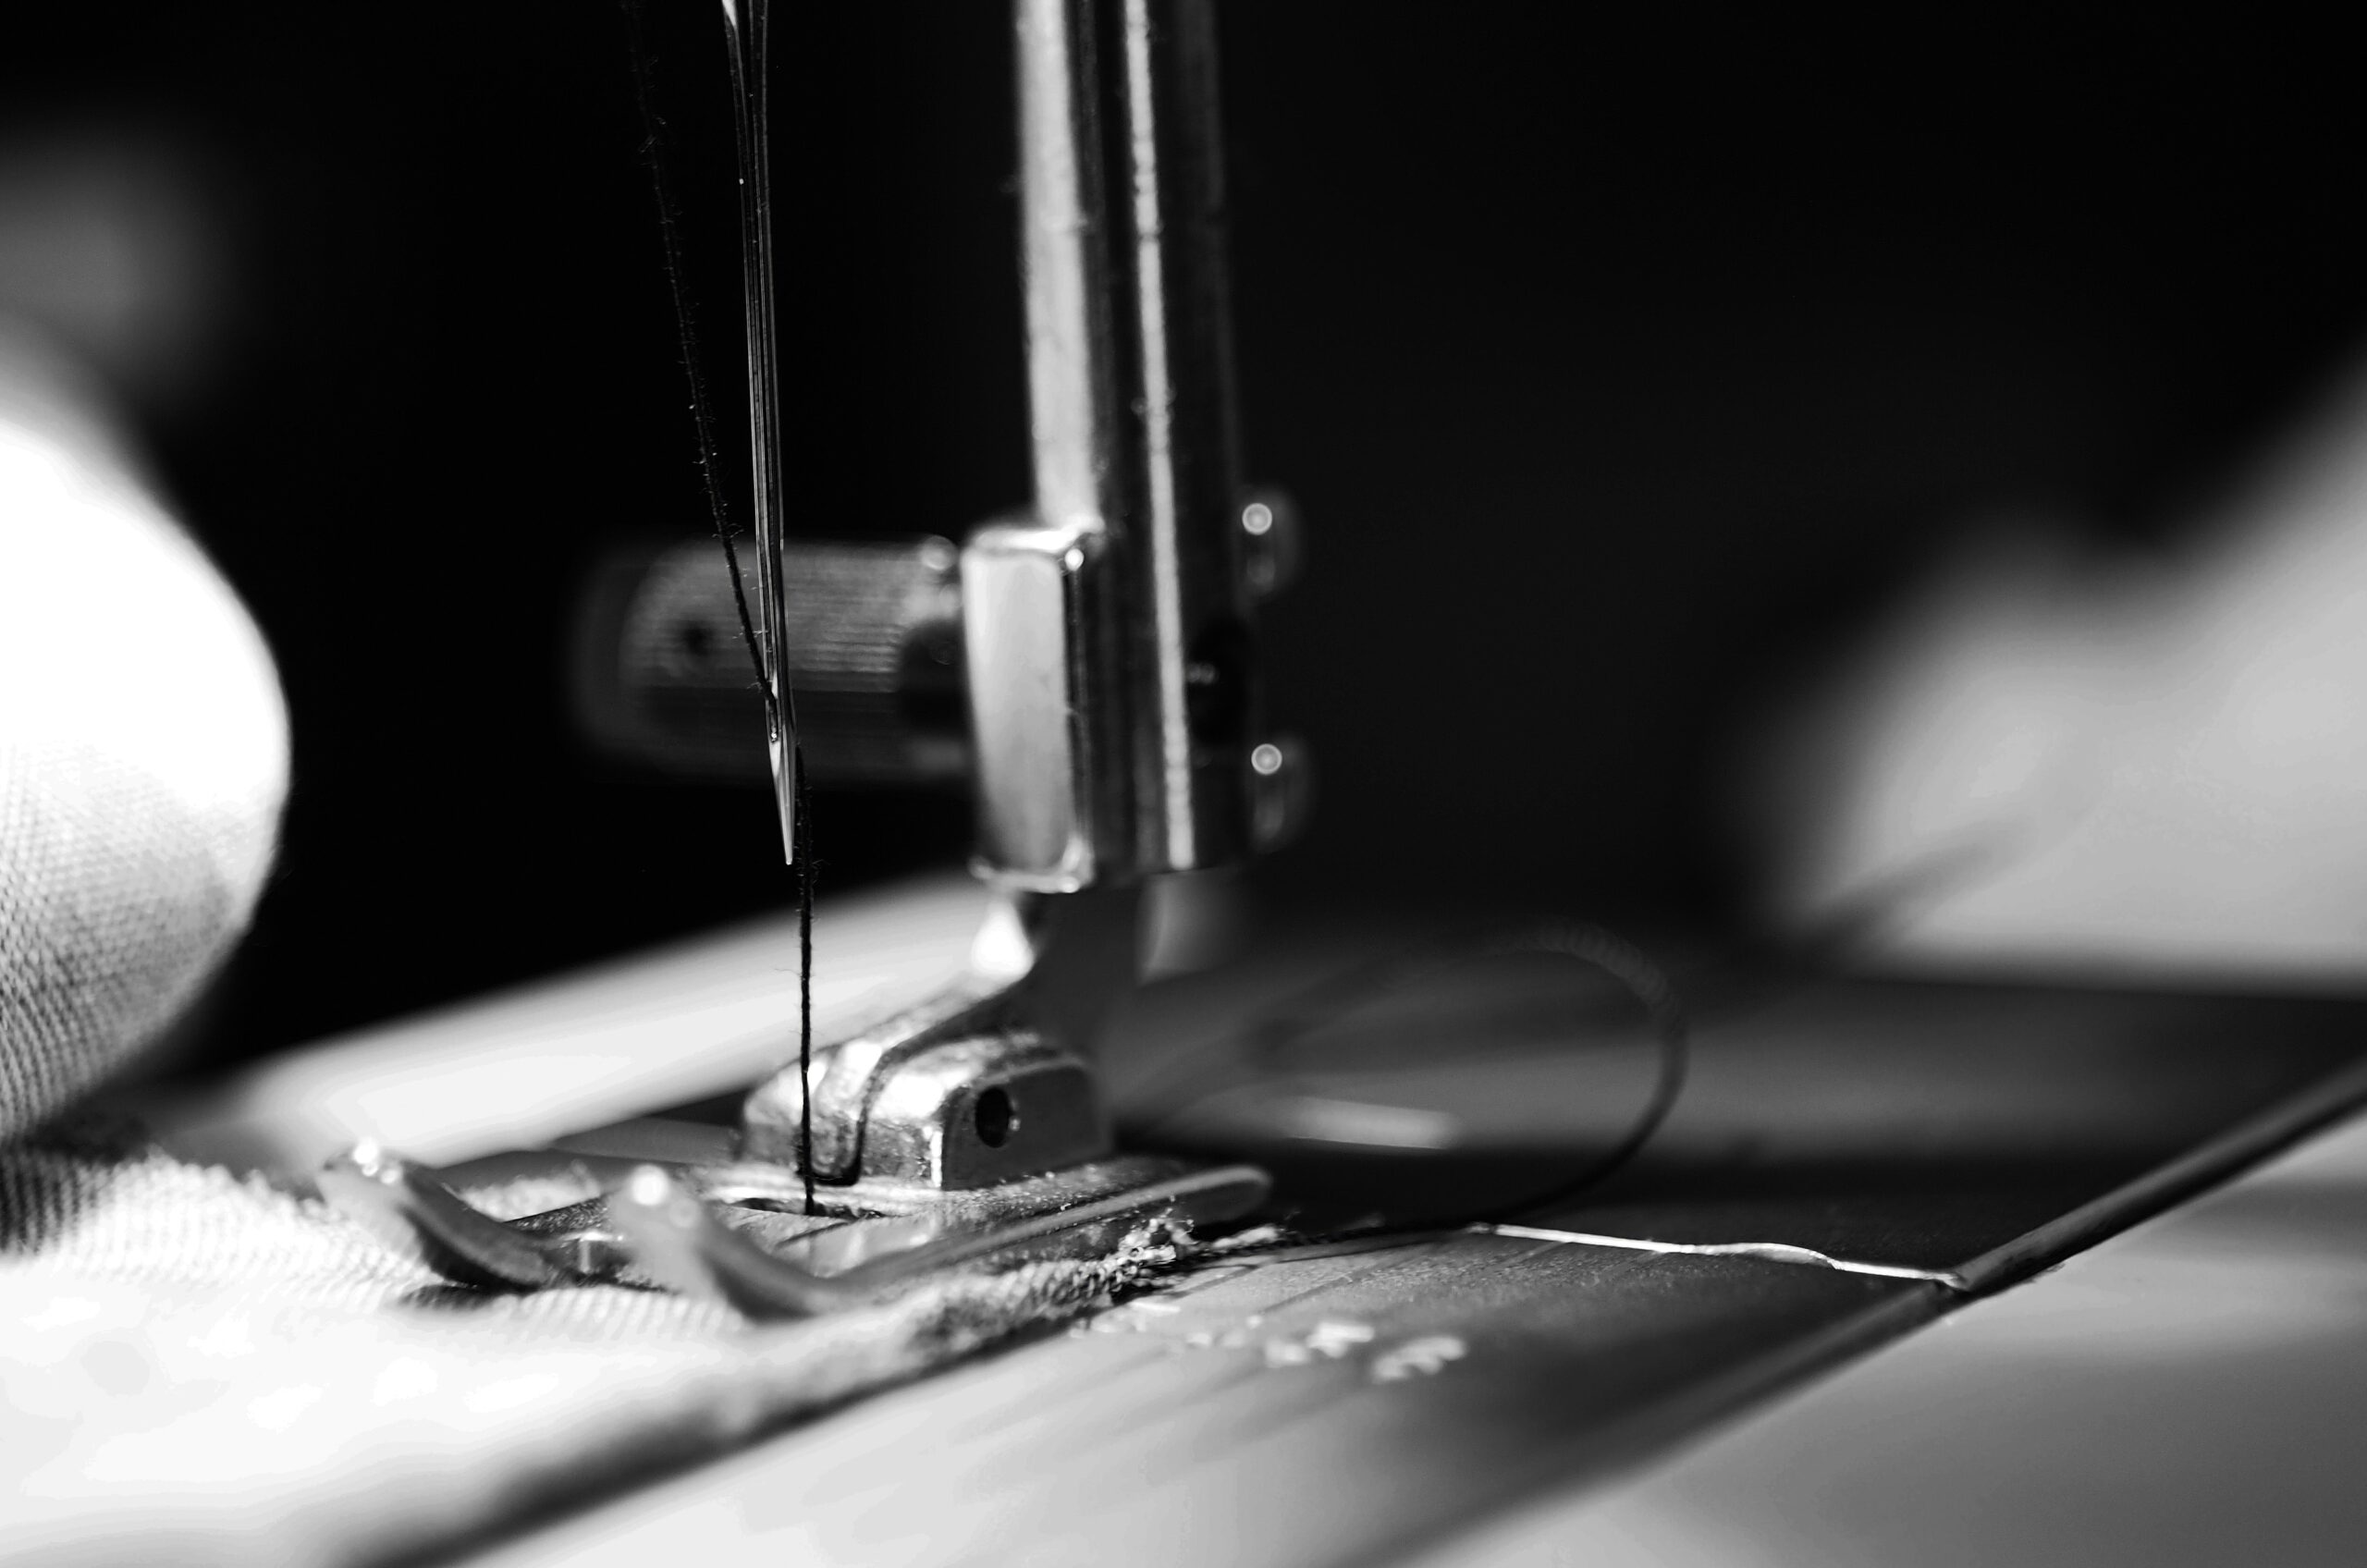 Black and white image of a sewing machine needle